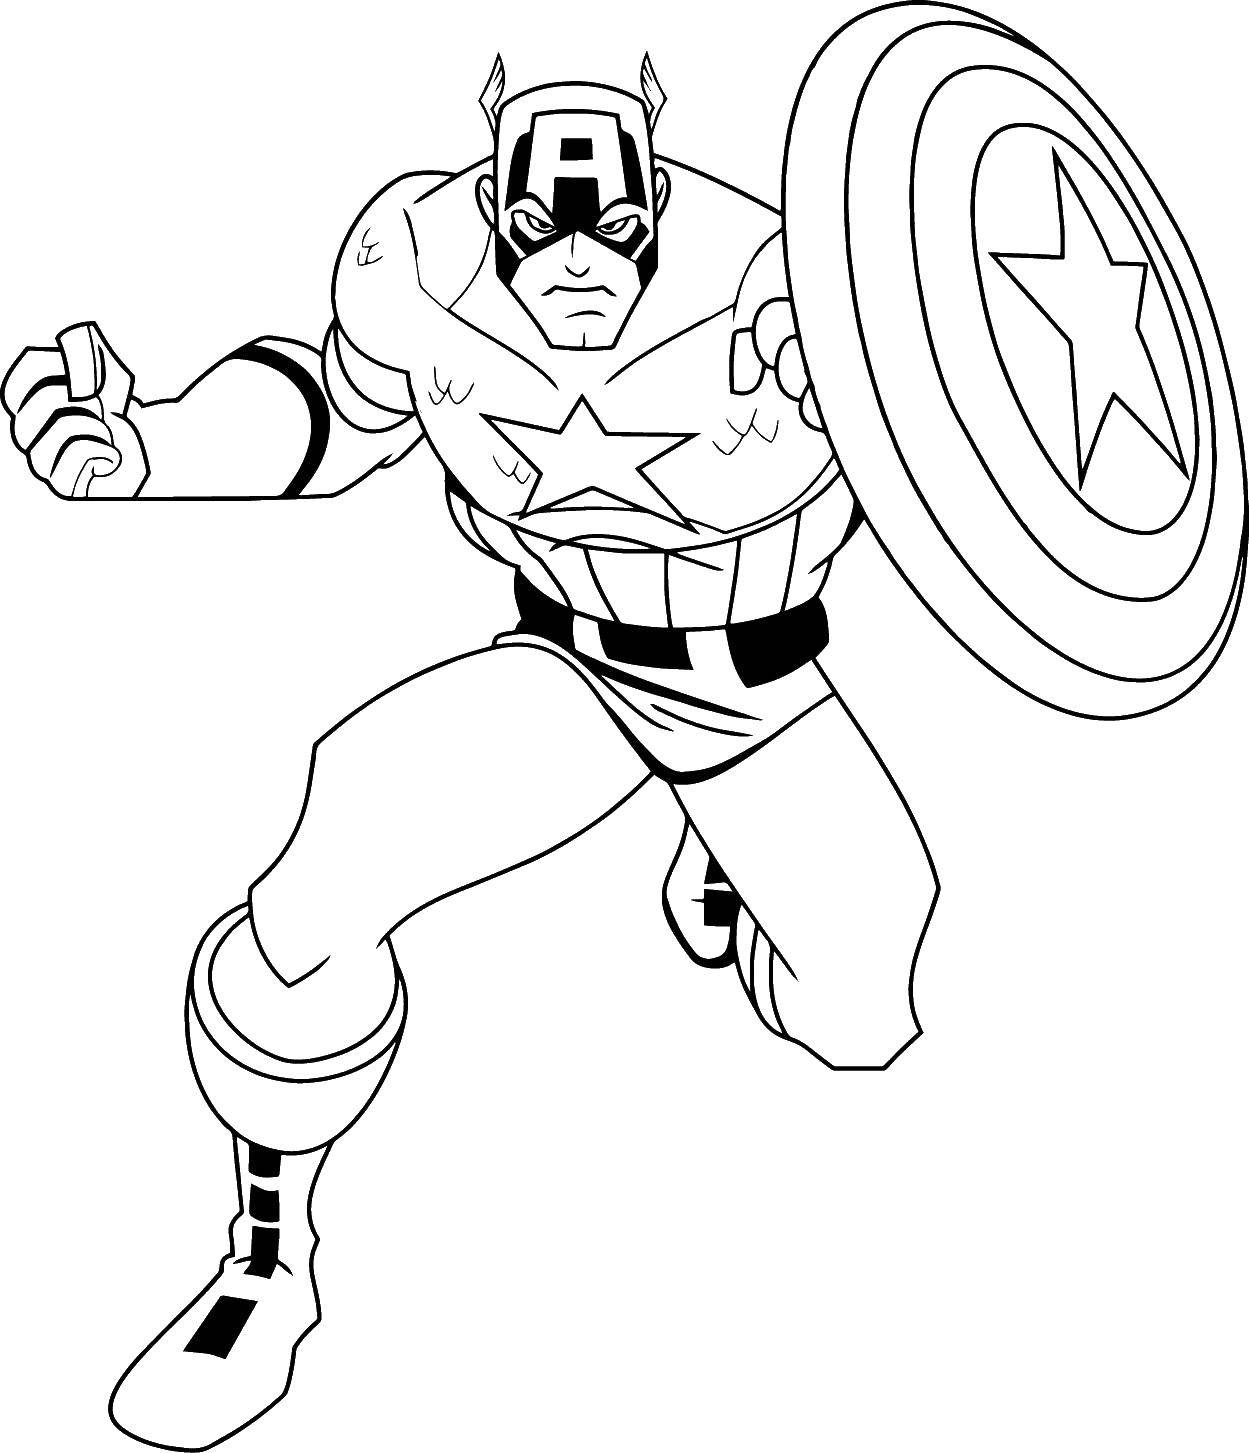 Coloring Captain America. Category superheroes. Tags:  superhero, captain America.